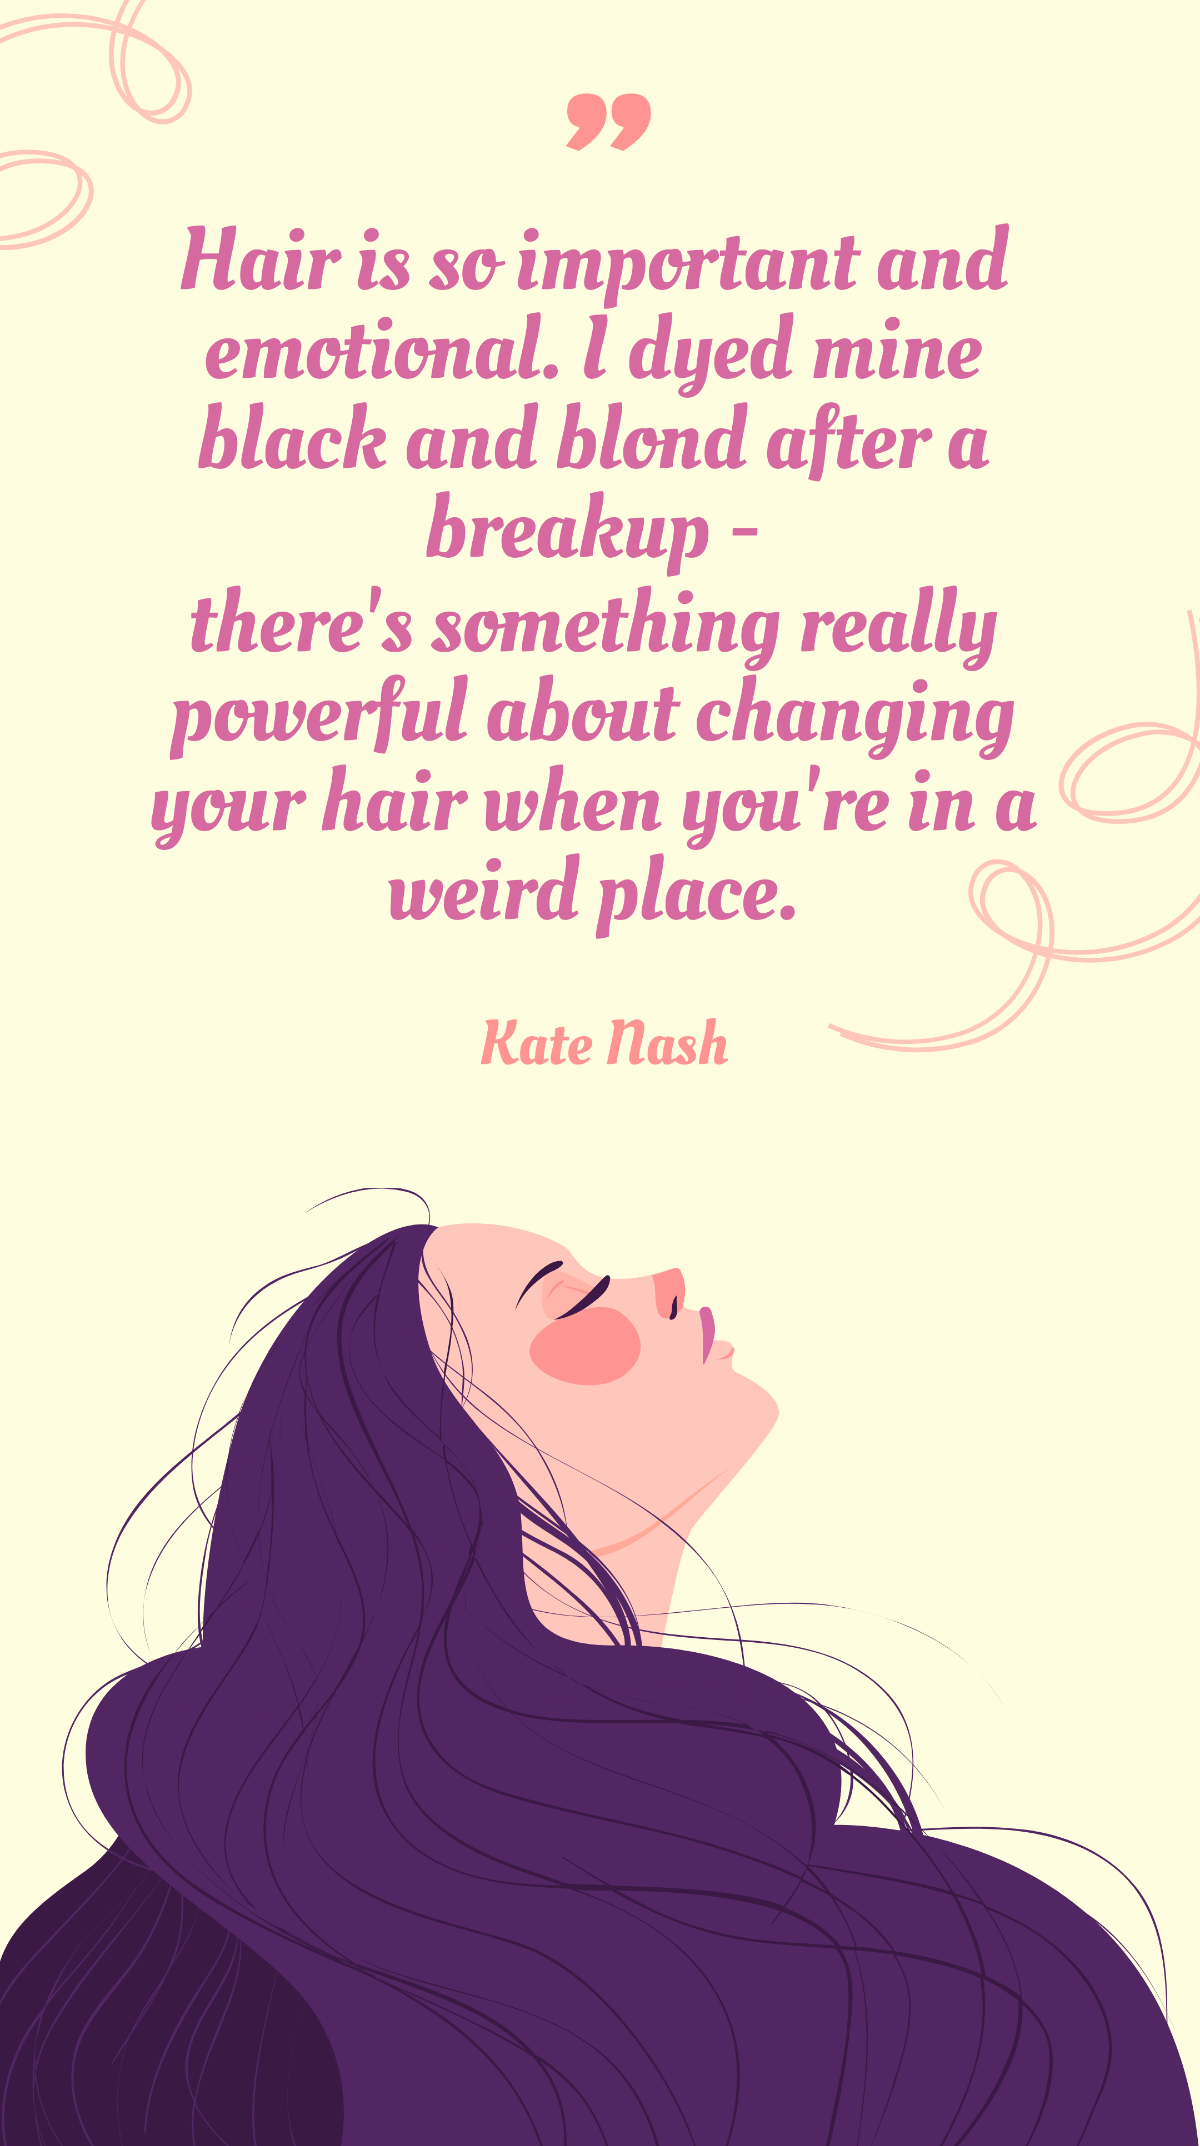 Kate Nash - Hair is so important and emotional. I dyed mine black and blond after a breakup - there's something really powerful about changing your hair when you're in a weird place. Template